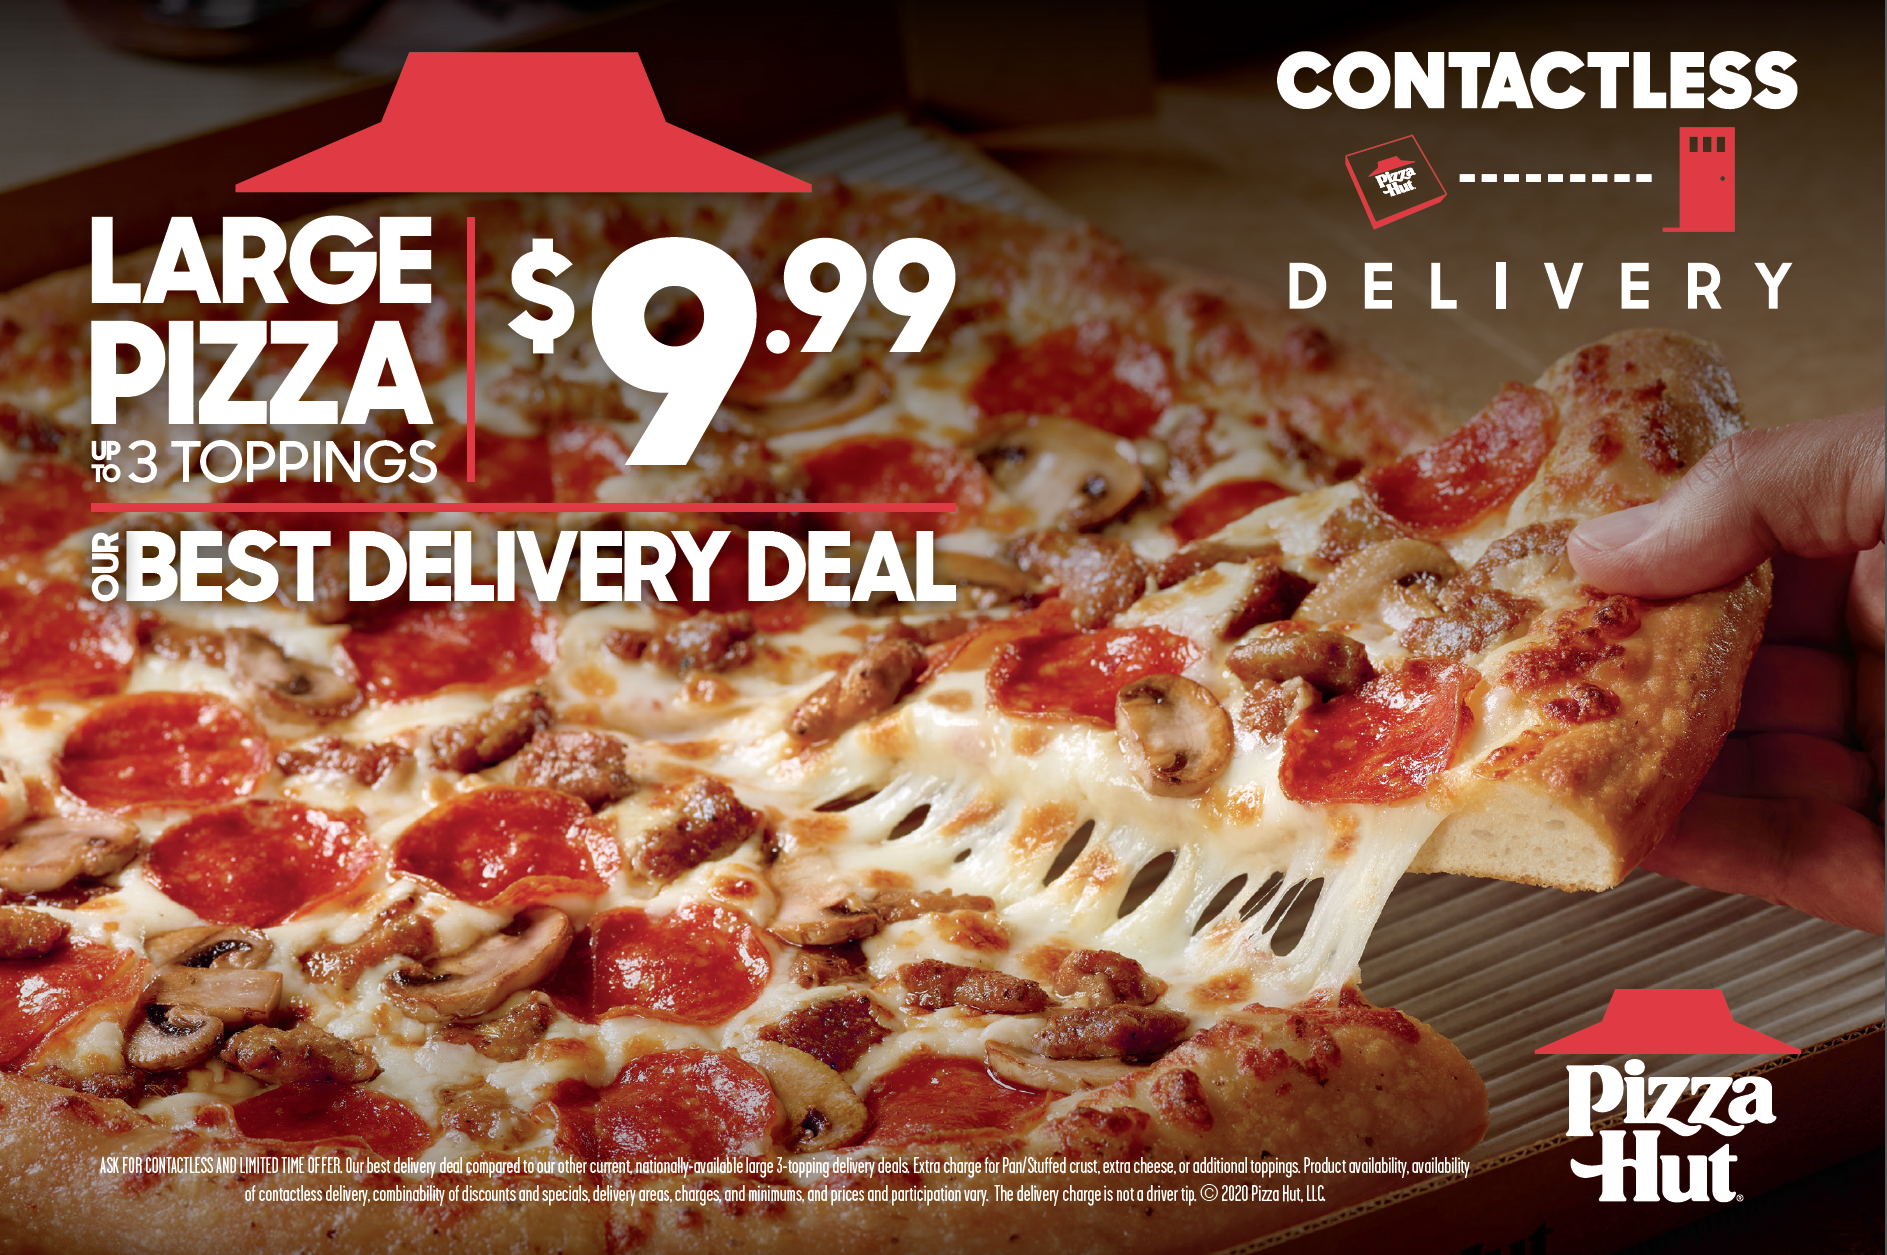 From Our Hut To Yours Pizza Hut Has Family Mealtime Covered With Best Delivery Deal Yet New 9 99 Large 3 Topping Pizza Hut Life Official Pizza Hut Blog